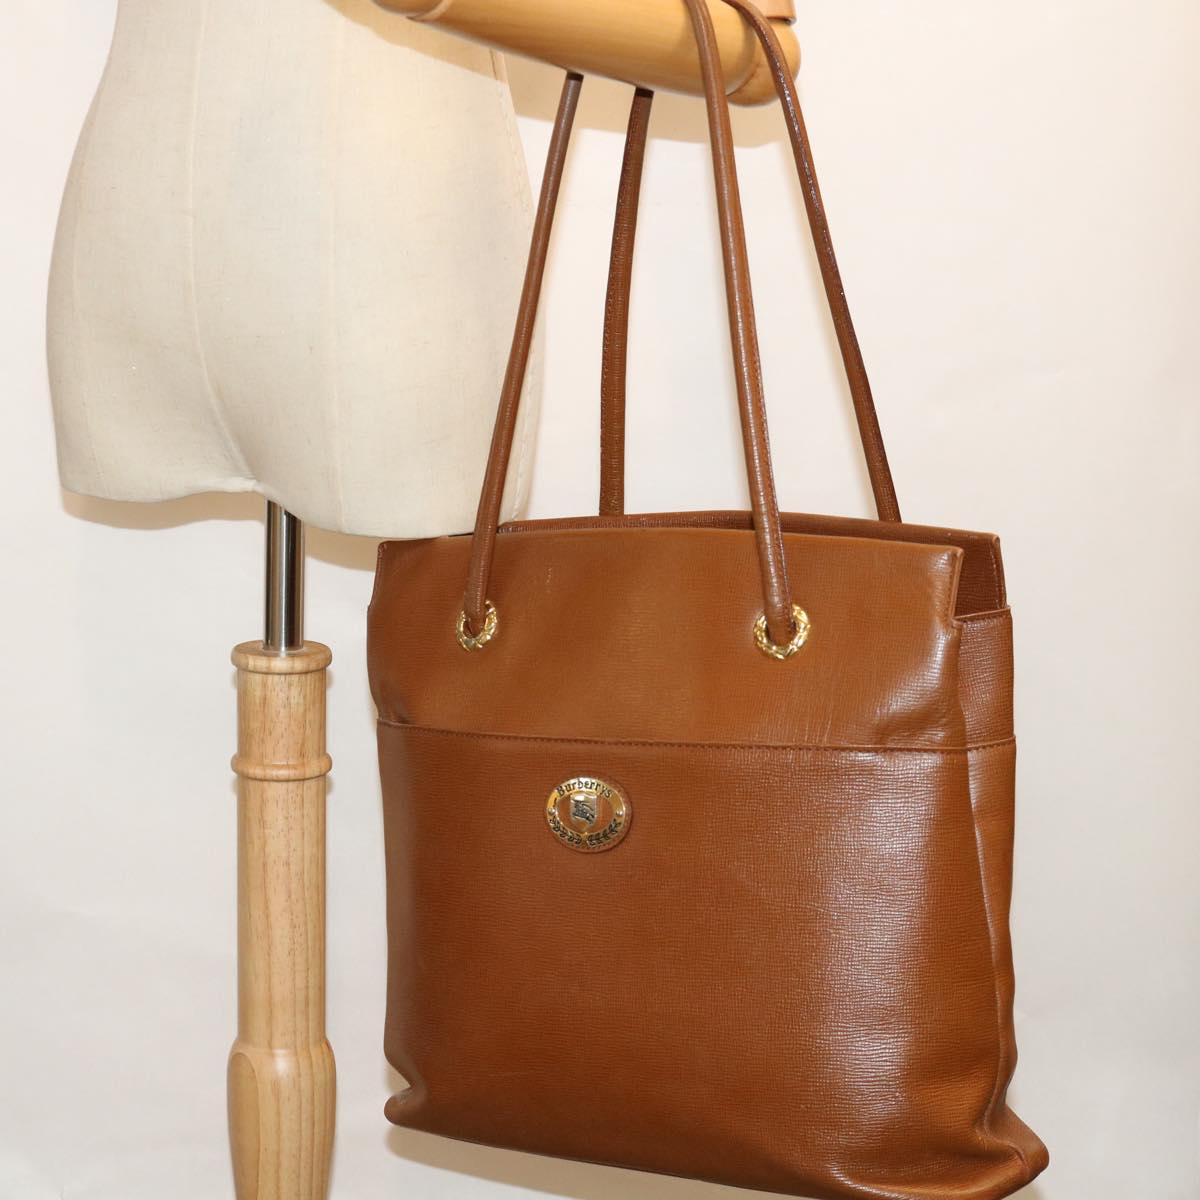 Burberrys Shoulder Bag Leather Brown Auth bs13405